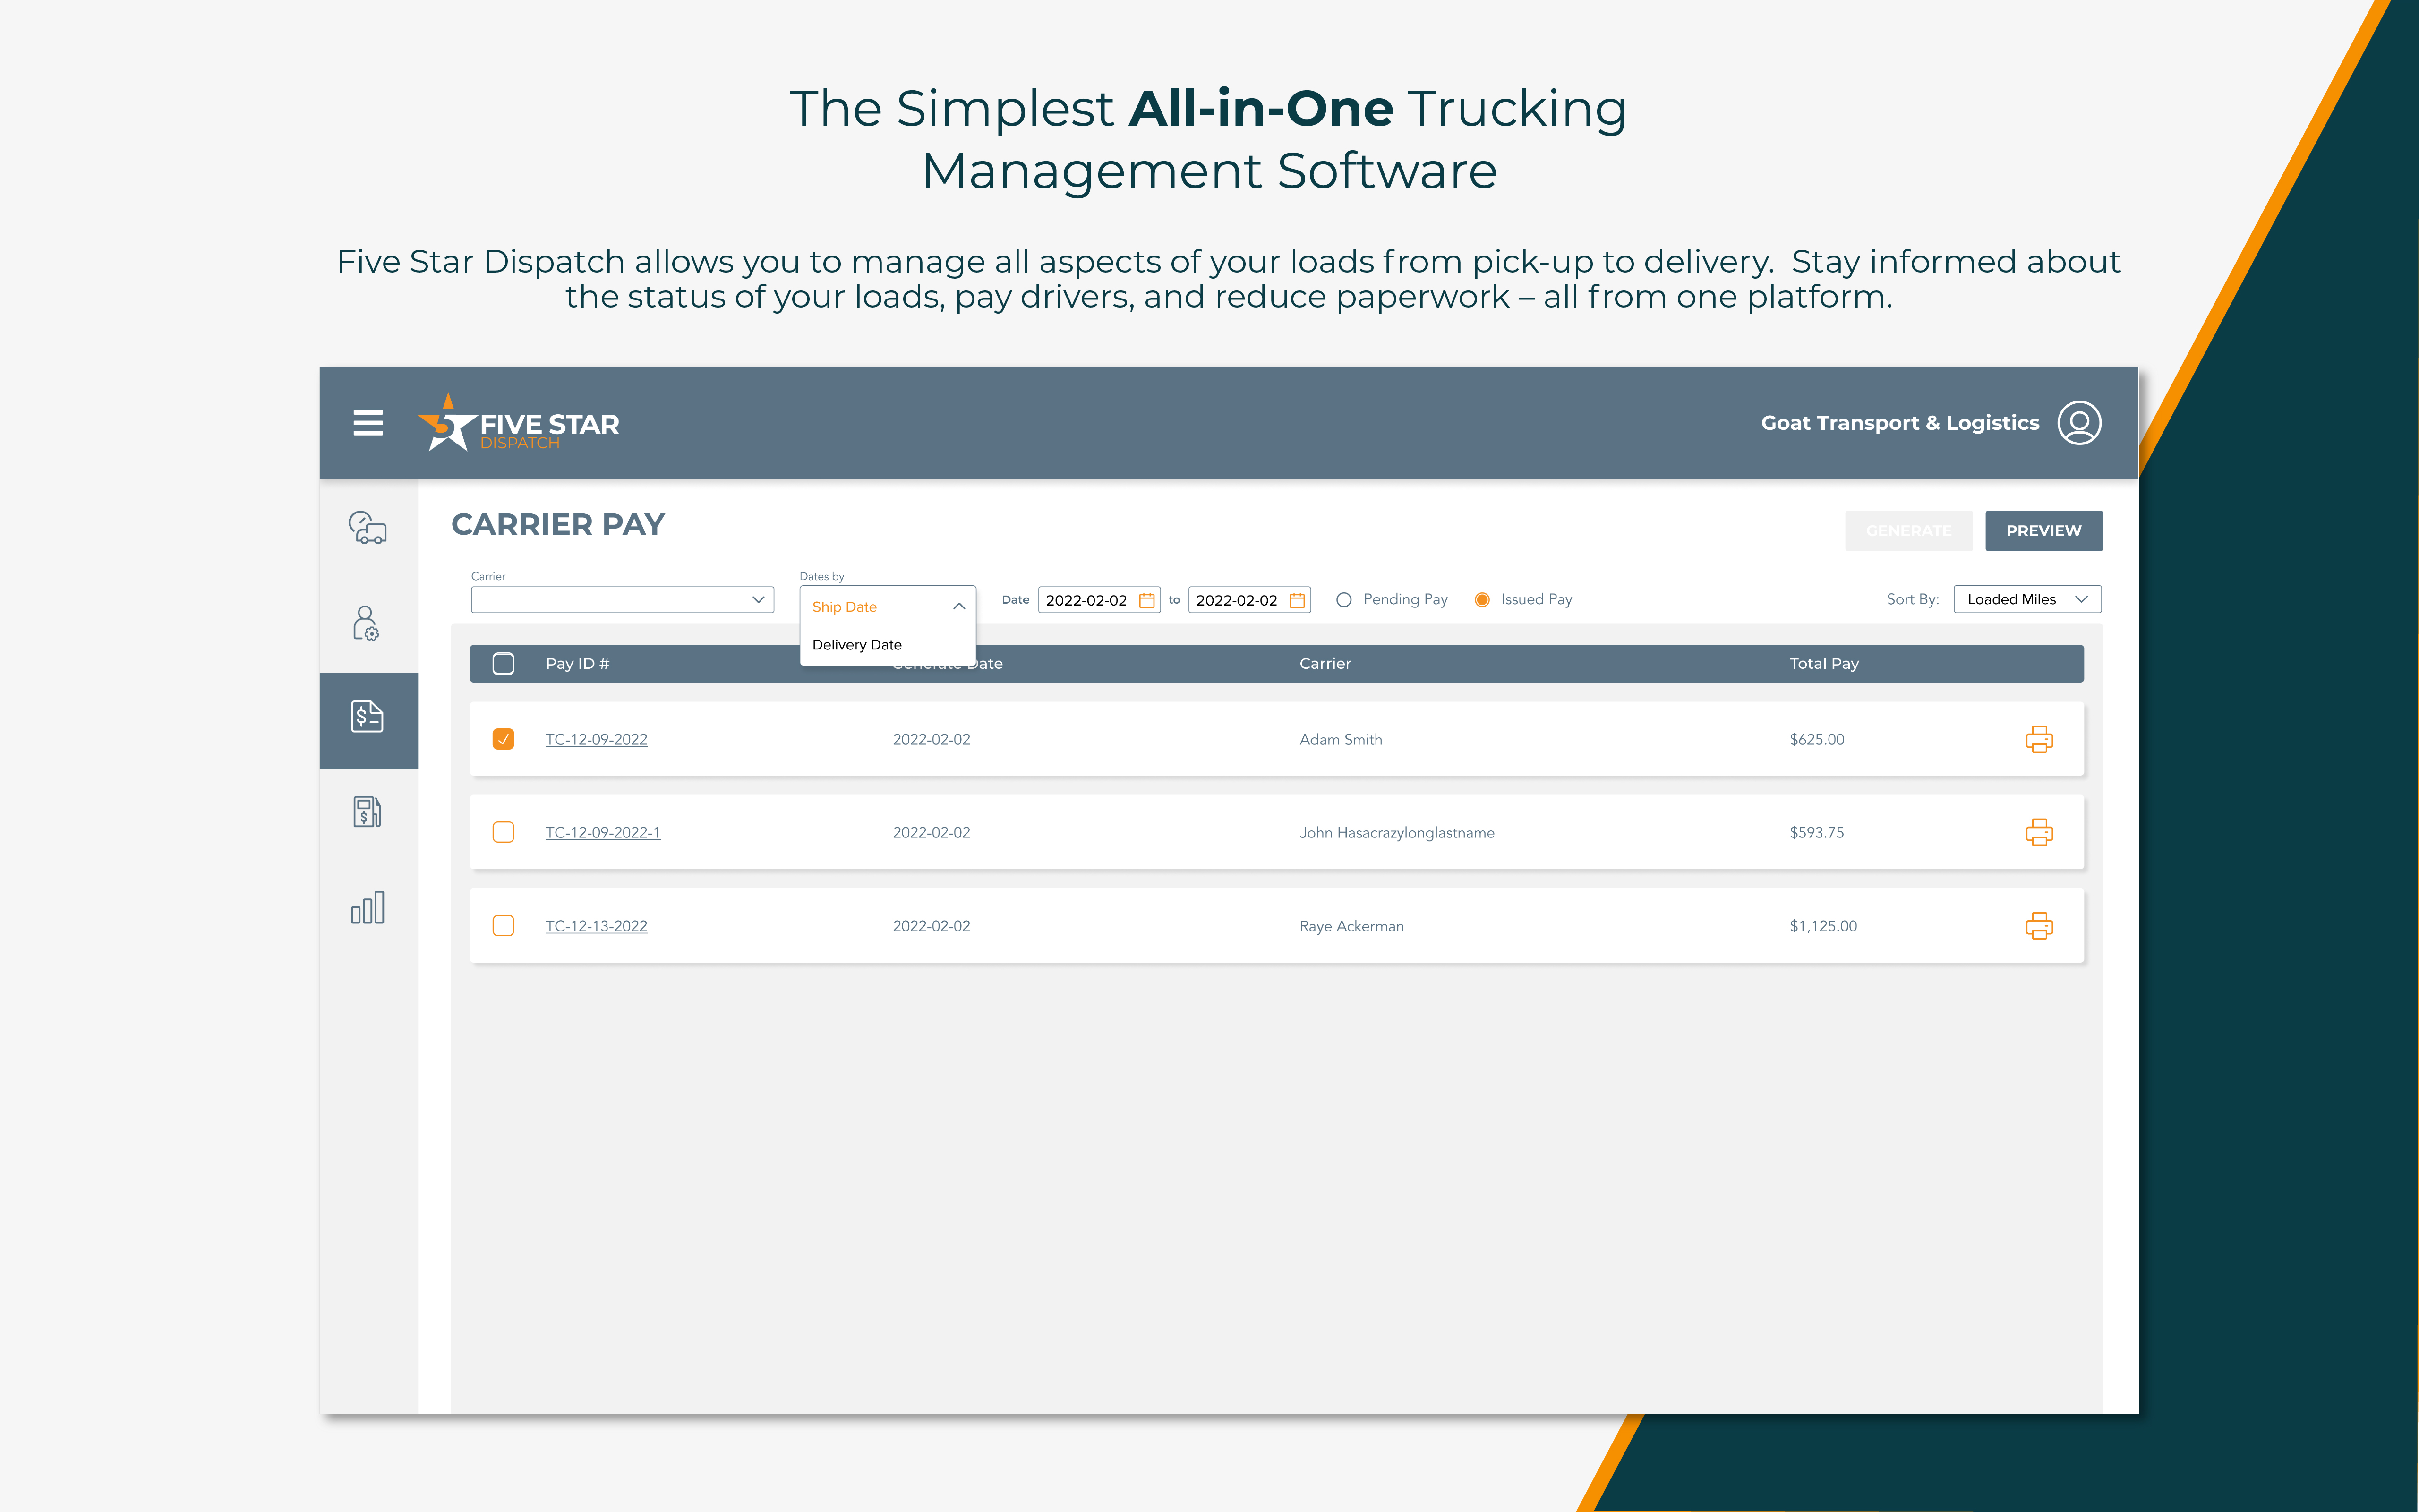 The Simplest All-in-One Trucking Management Software